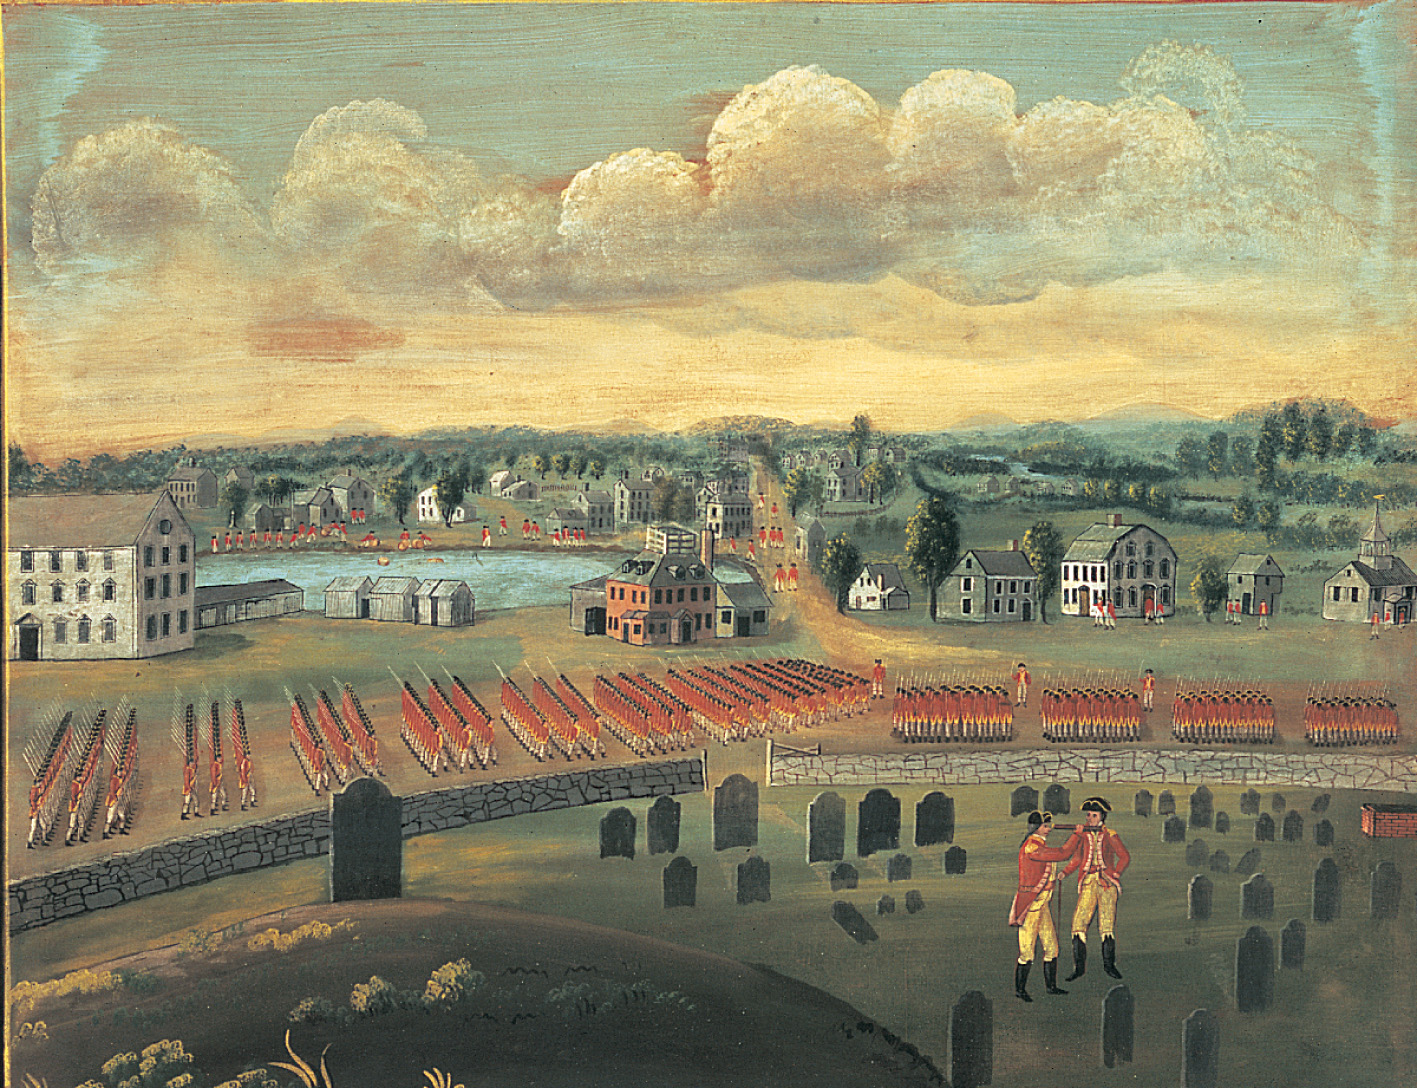 painting: cloumns of red-coated soldiers march in a field near a town.